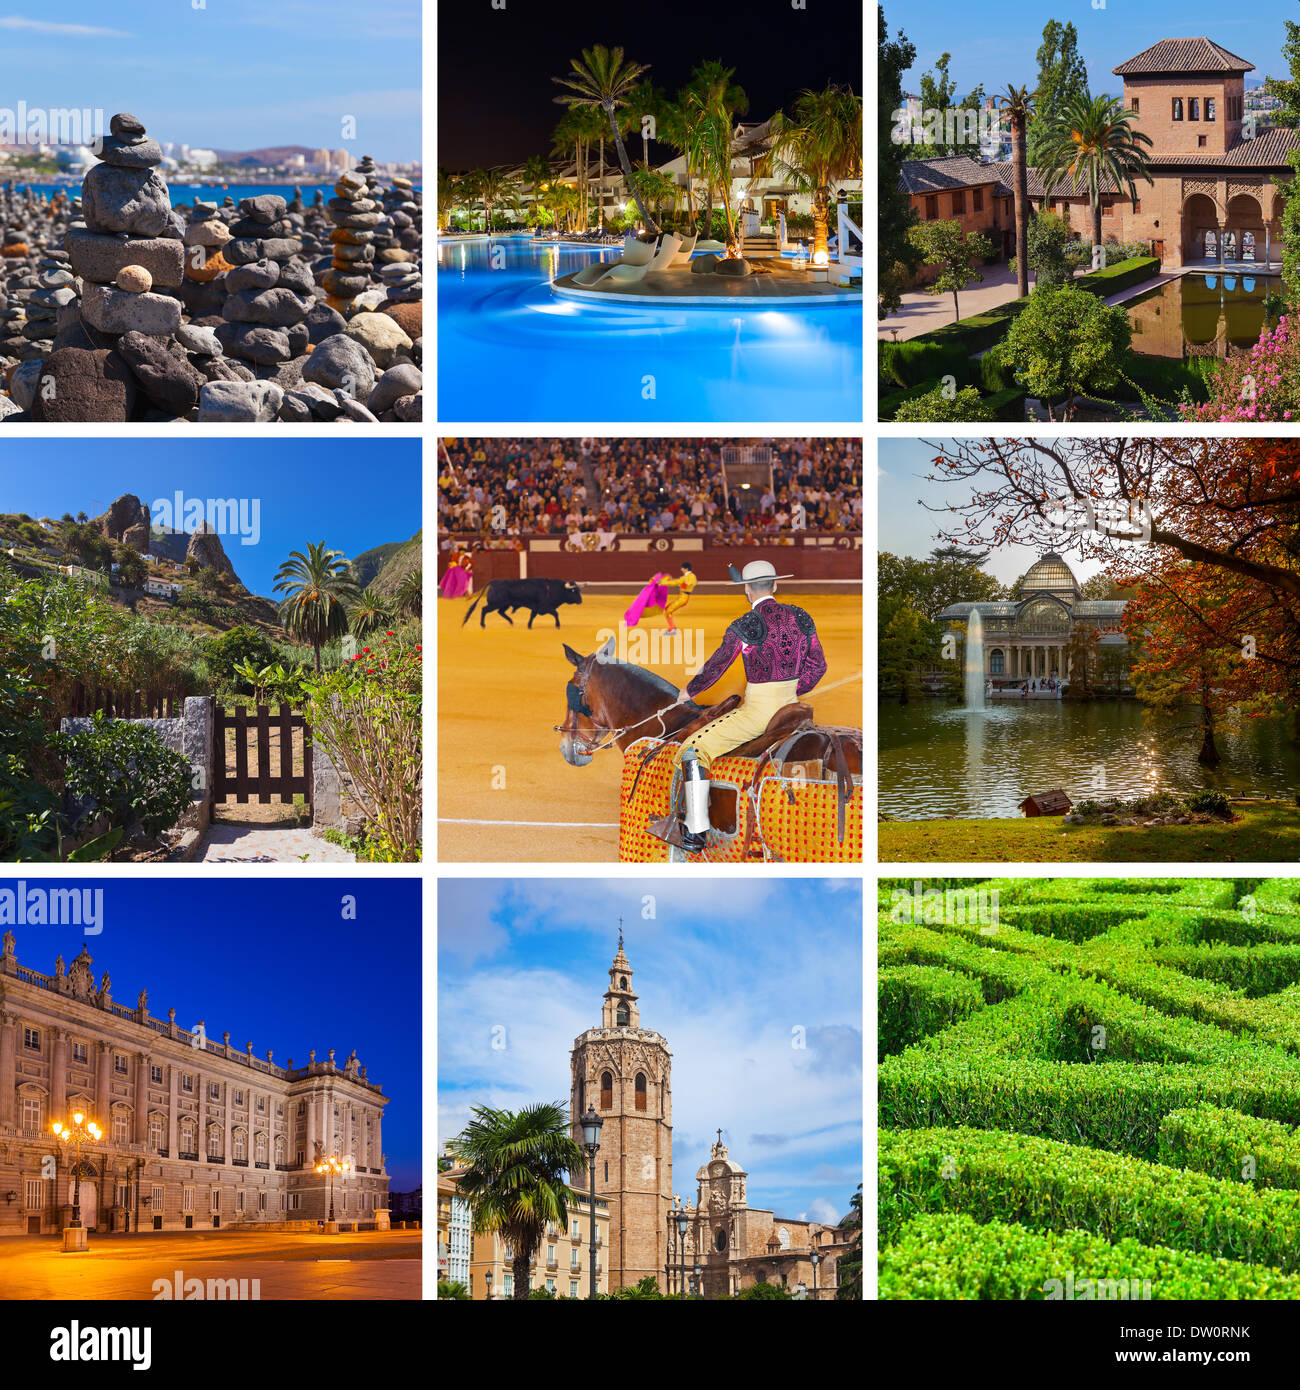 Collage of Spain images Stock Photo